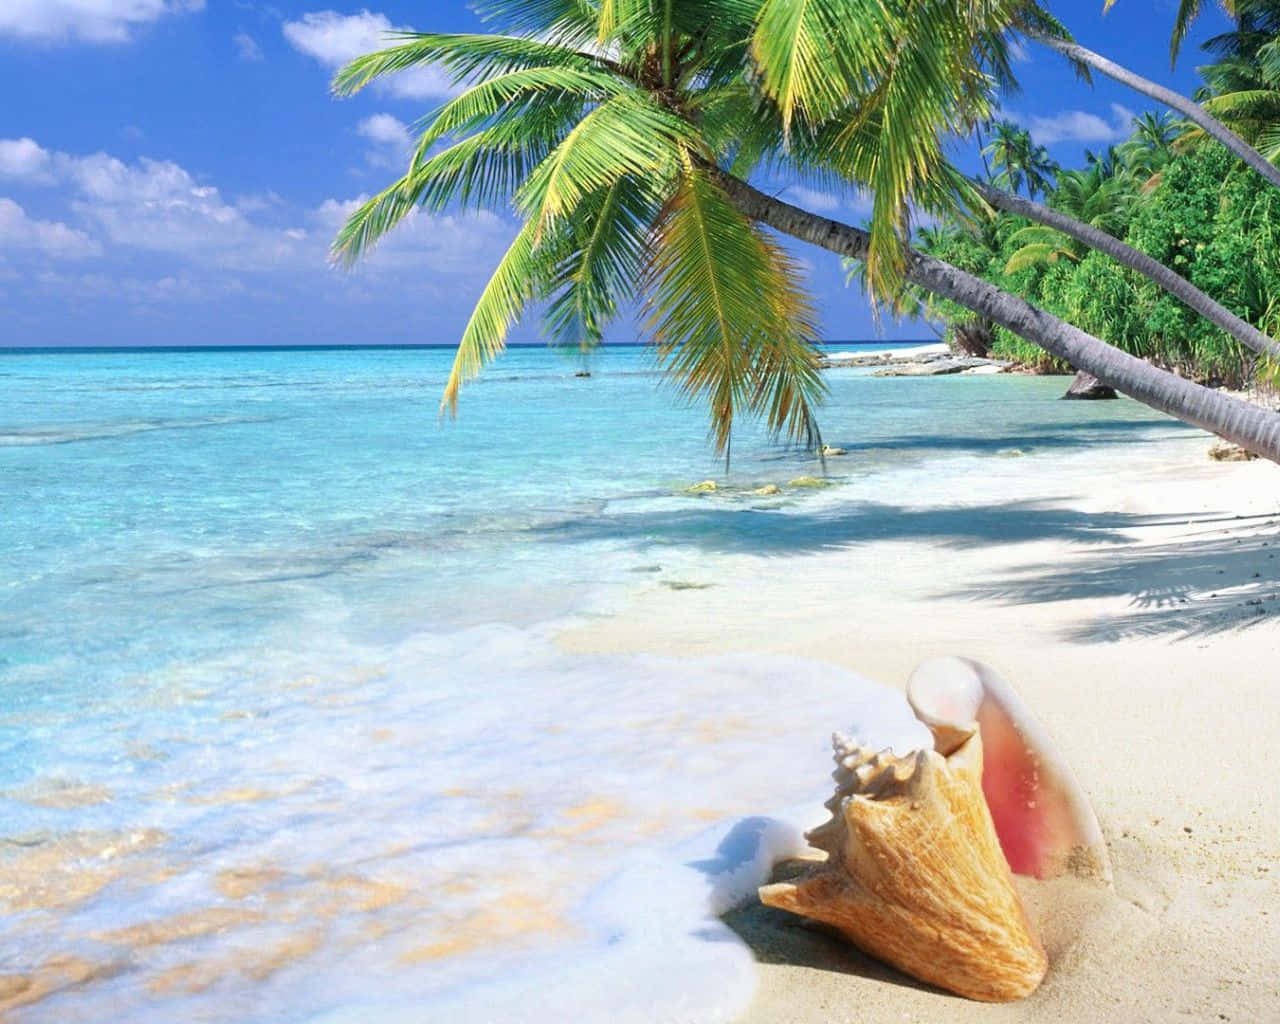 a beach with palm trees and a seashell